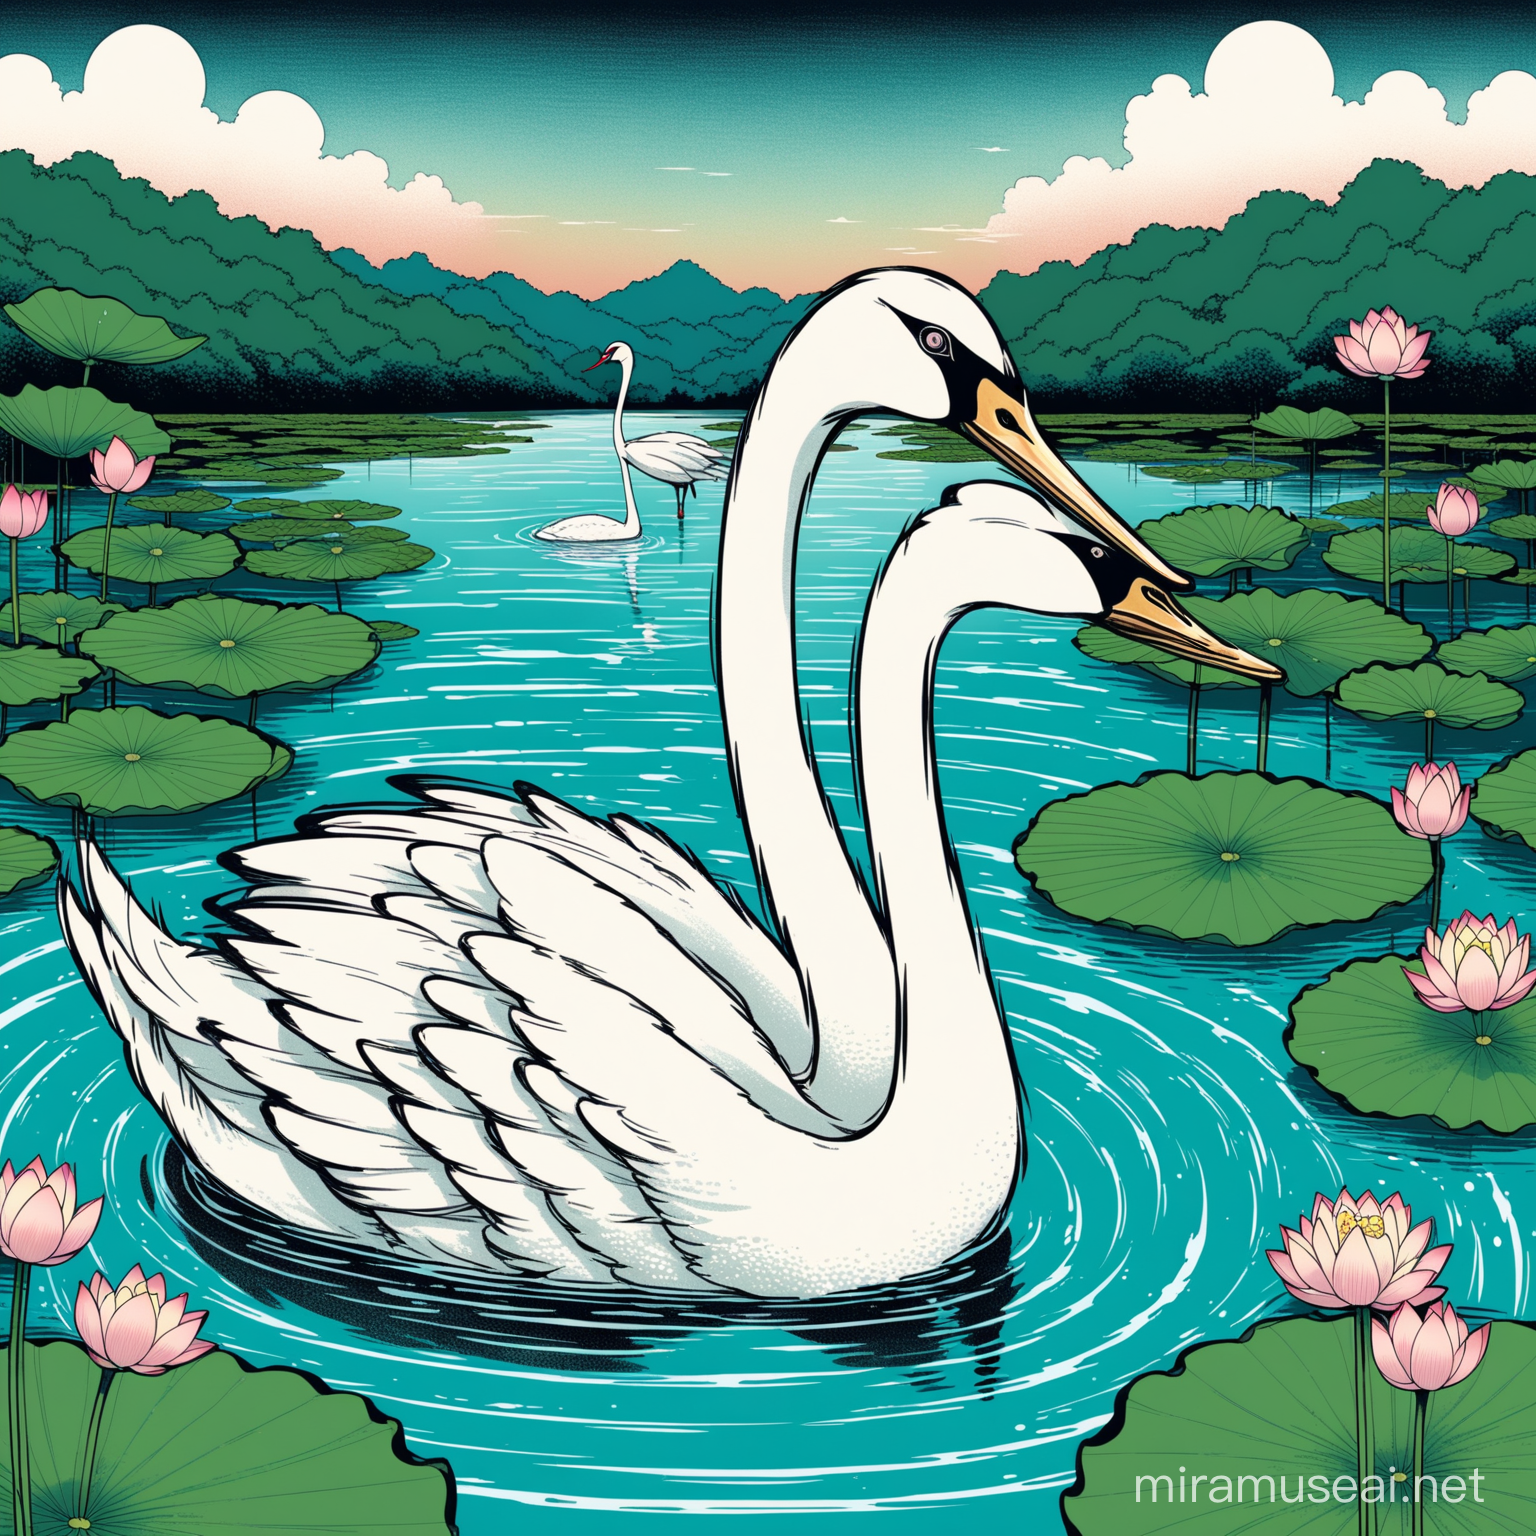 Lotus on pond water. A swan with a crane head and peackock head joined to the swan. Junji ito style,